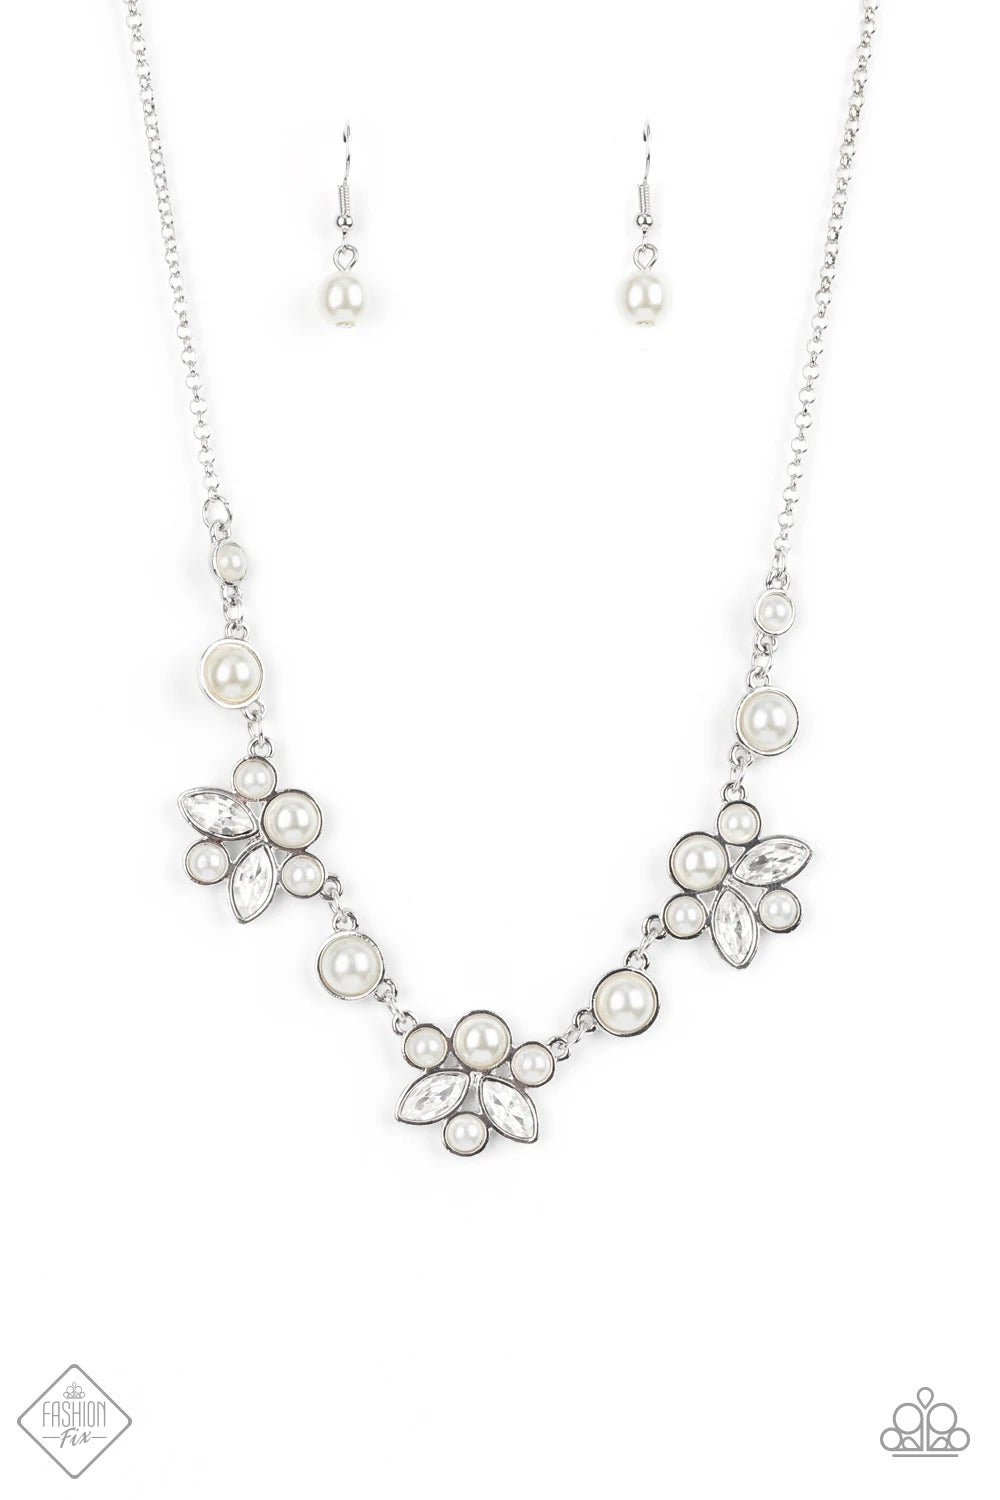 Paparazzi Royally Ever After White Short Necklace - Fashion Fiercely 5th Avenue July 2021